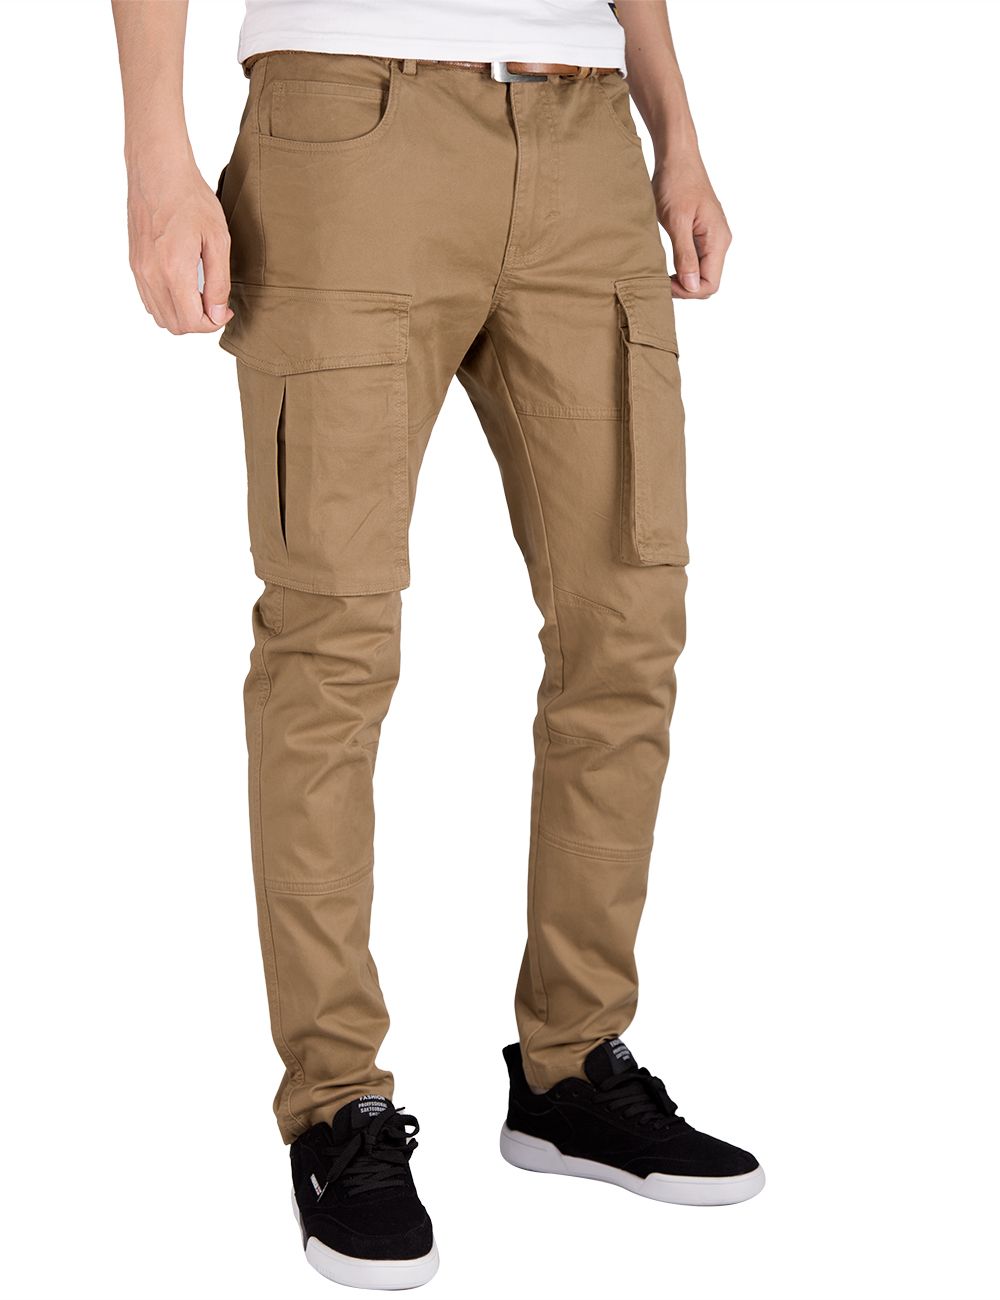 Baggy pants men have made a stylish comeback, offering both comfort and versatility in modern fashion. However, mastering